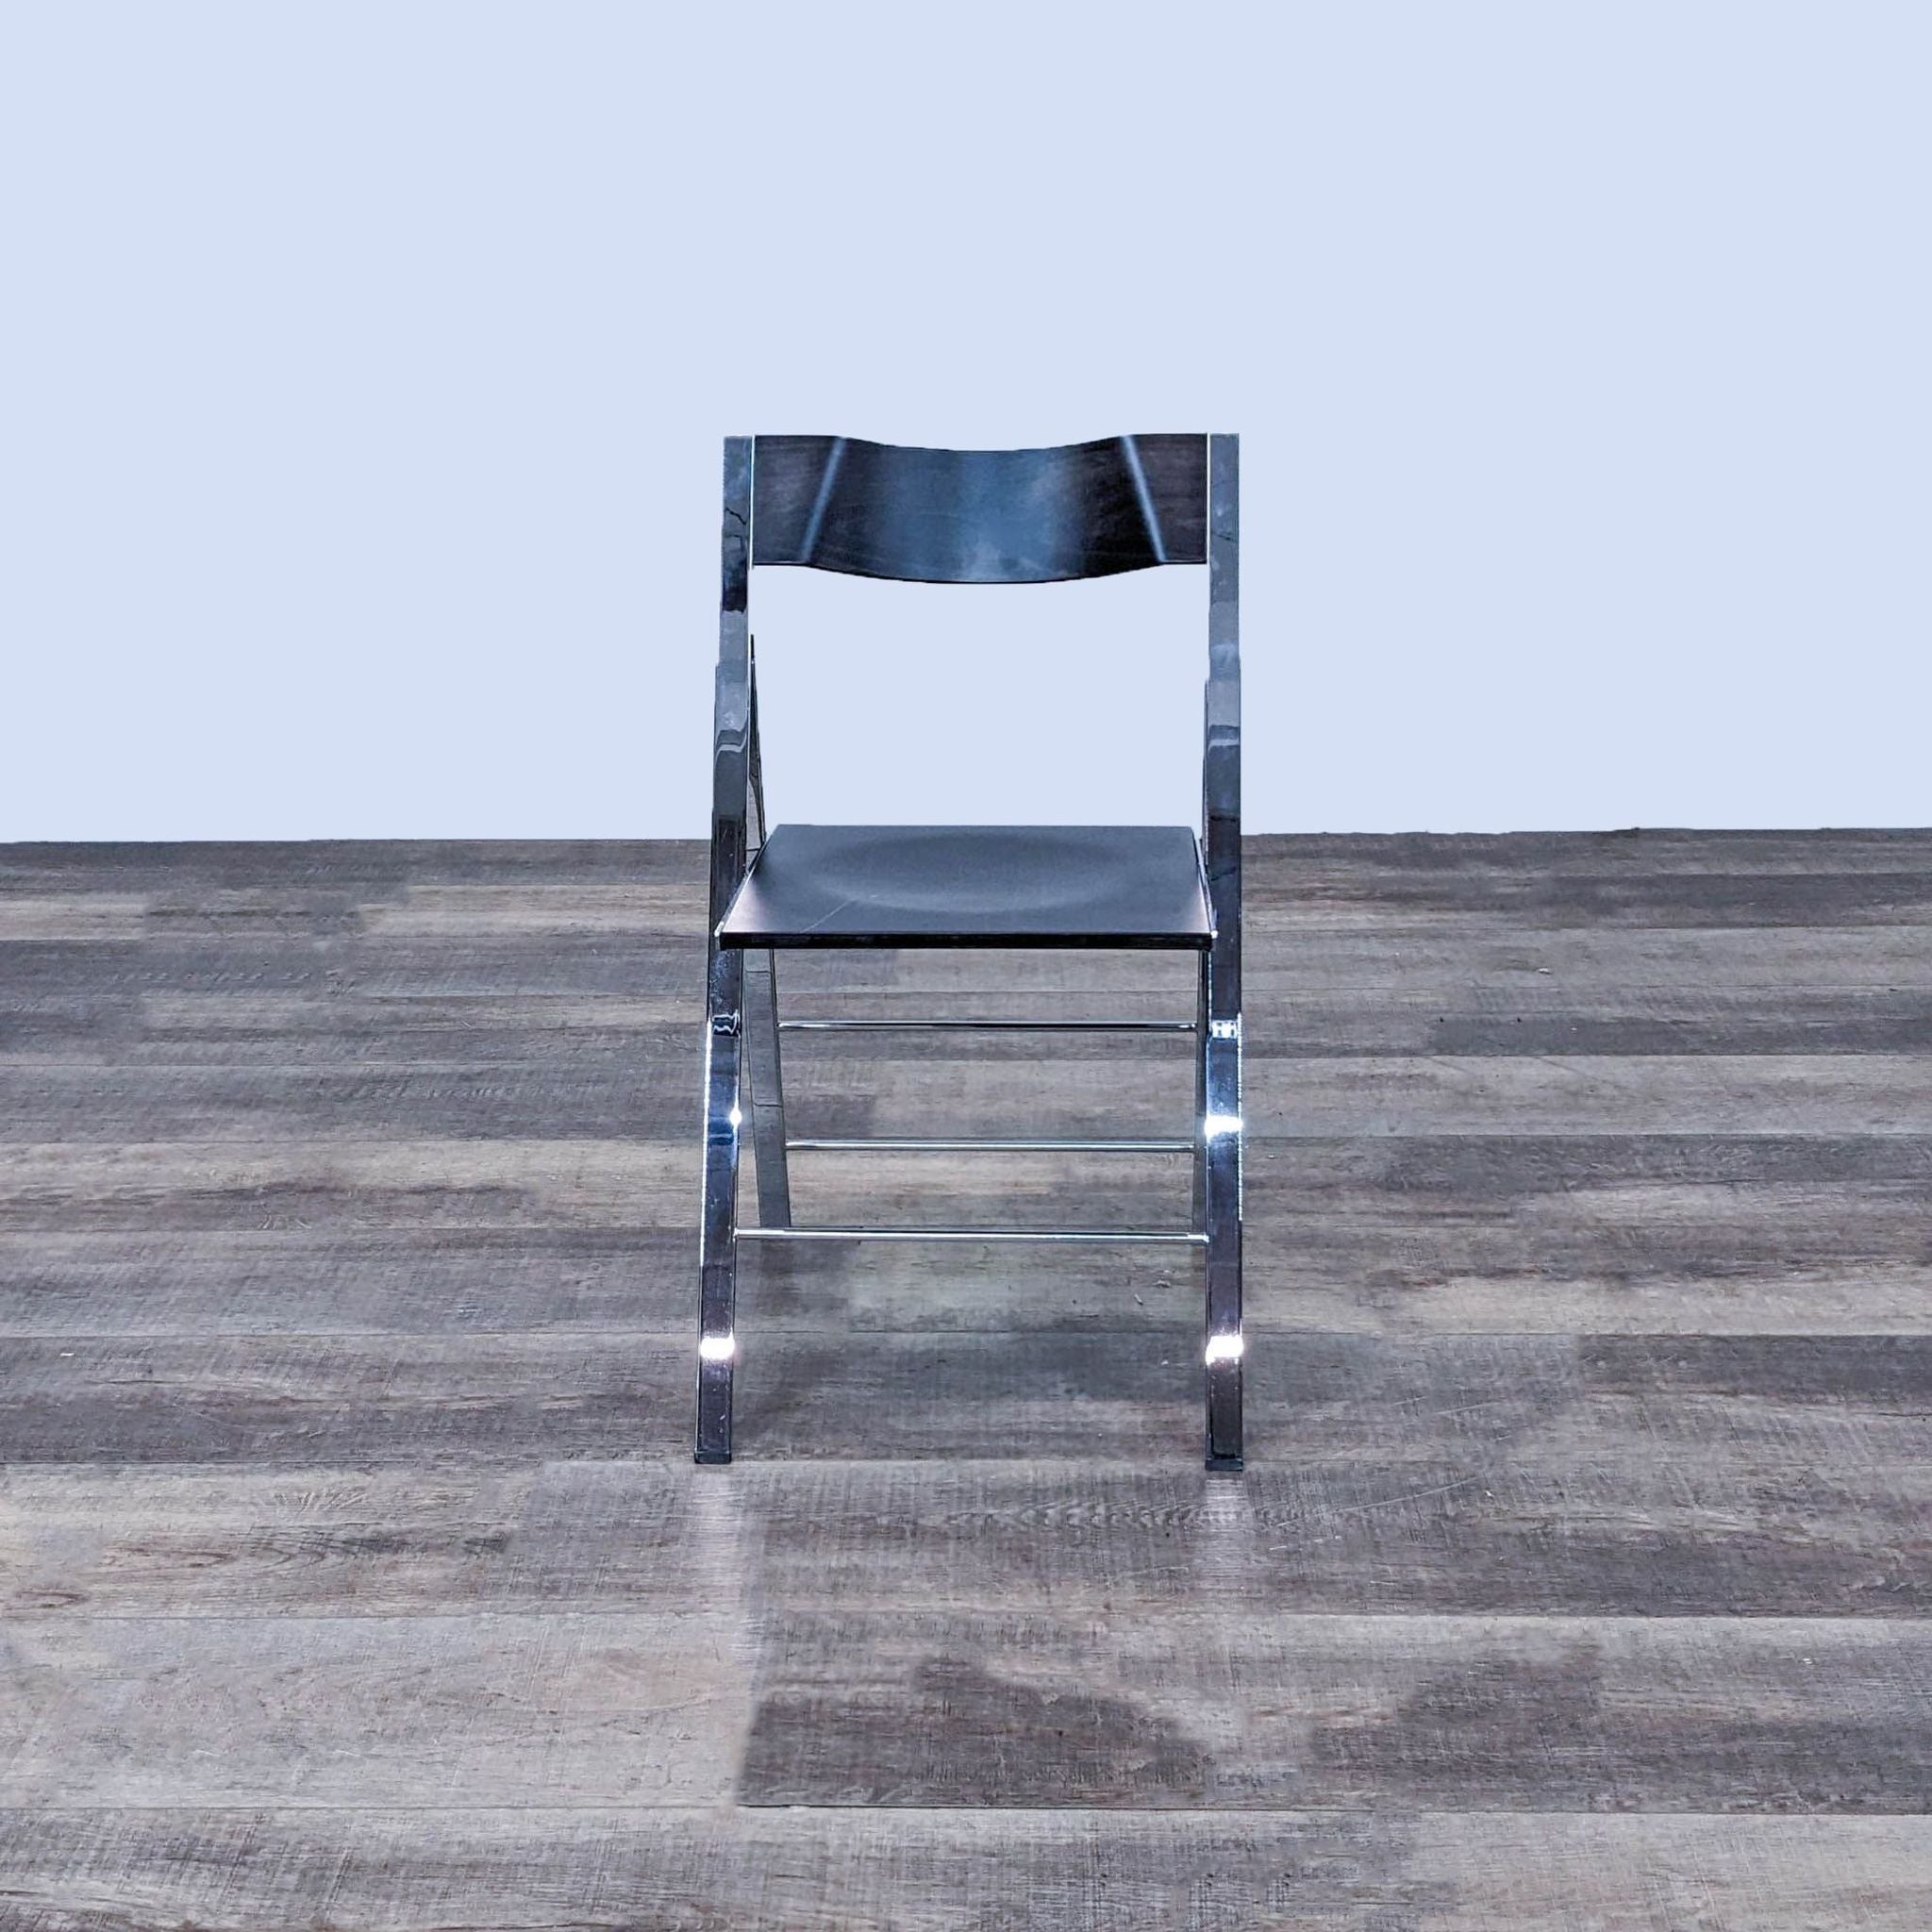 Alt text 1: Chrome foldable frame chair with dark wood seat and back, modern design, from Resource Furniture, displayed in profile view on wooden flooring.